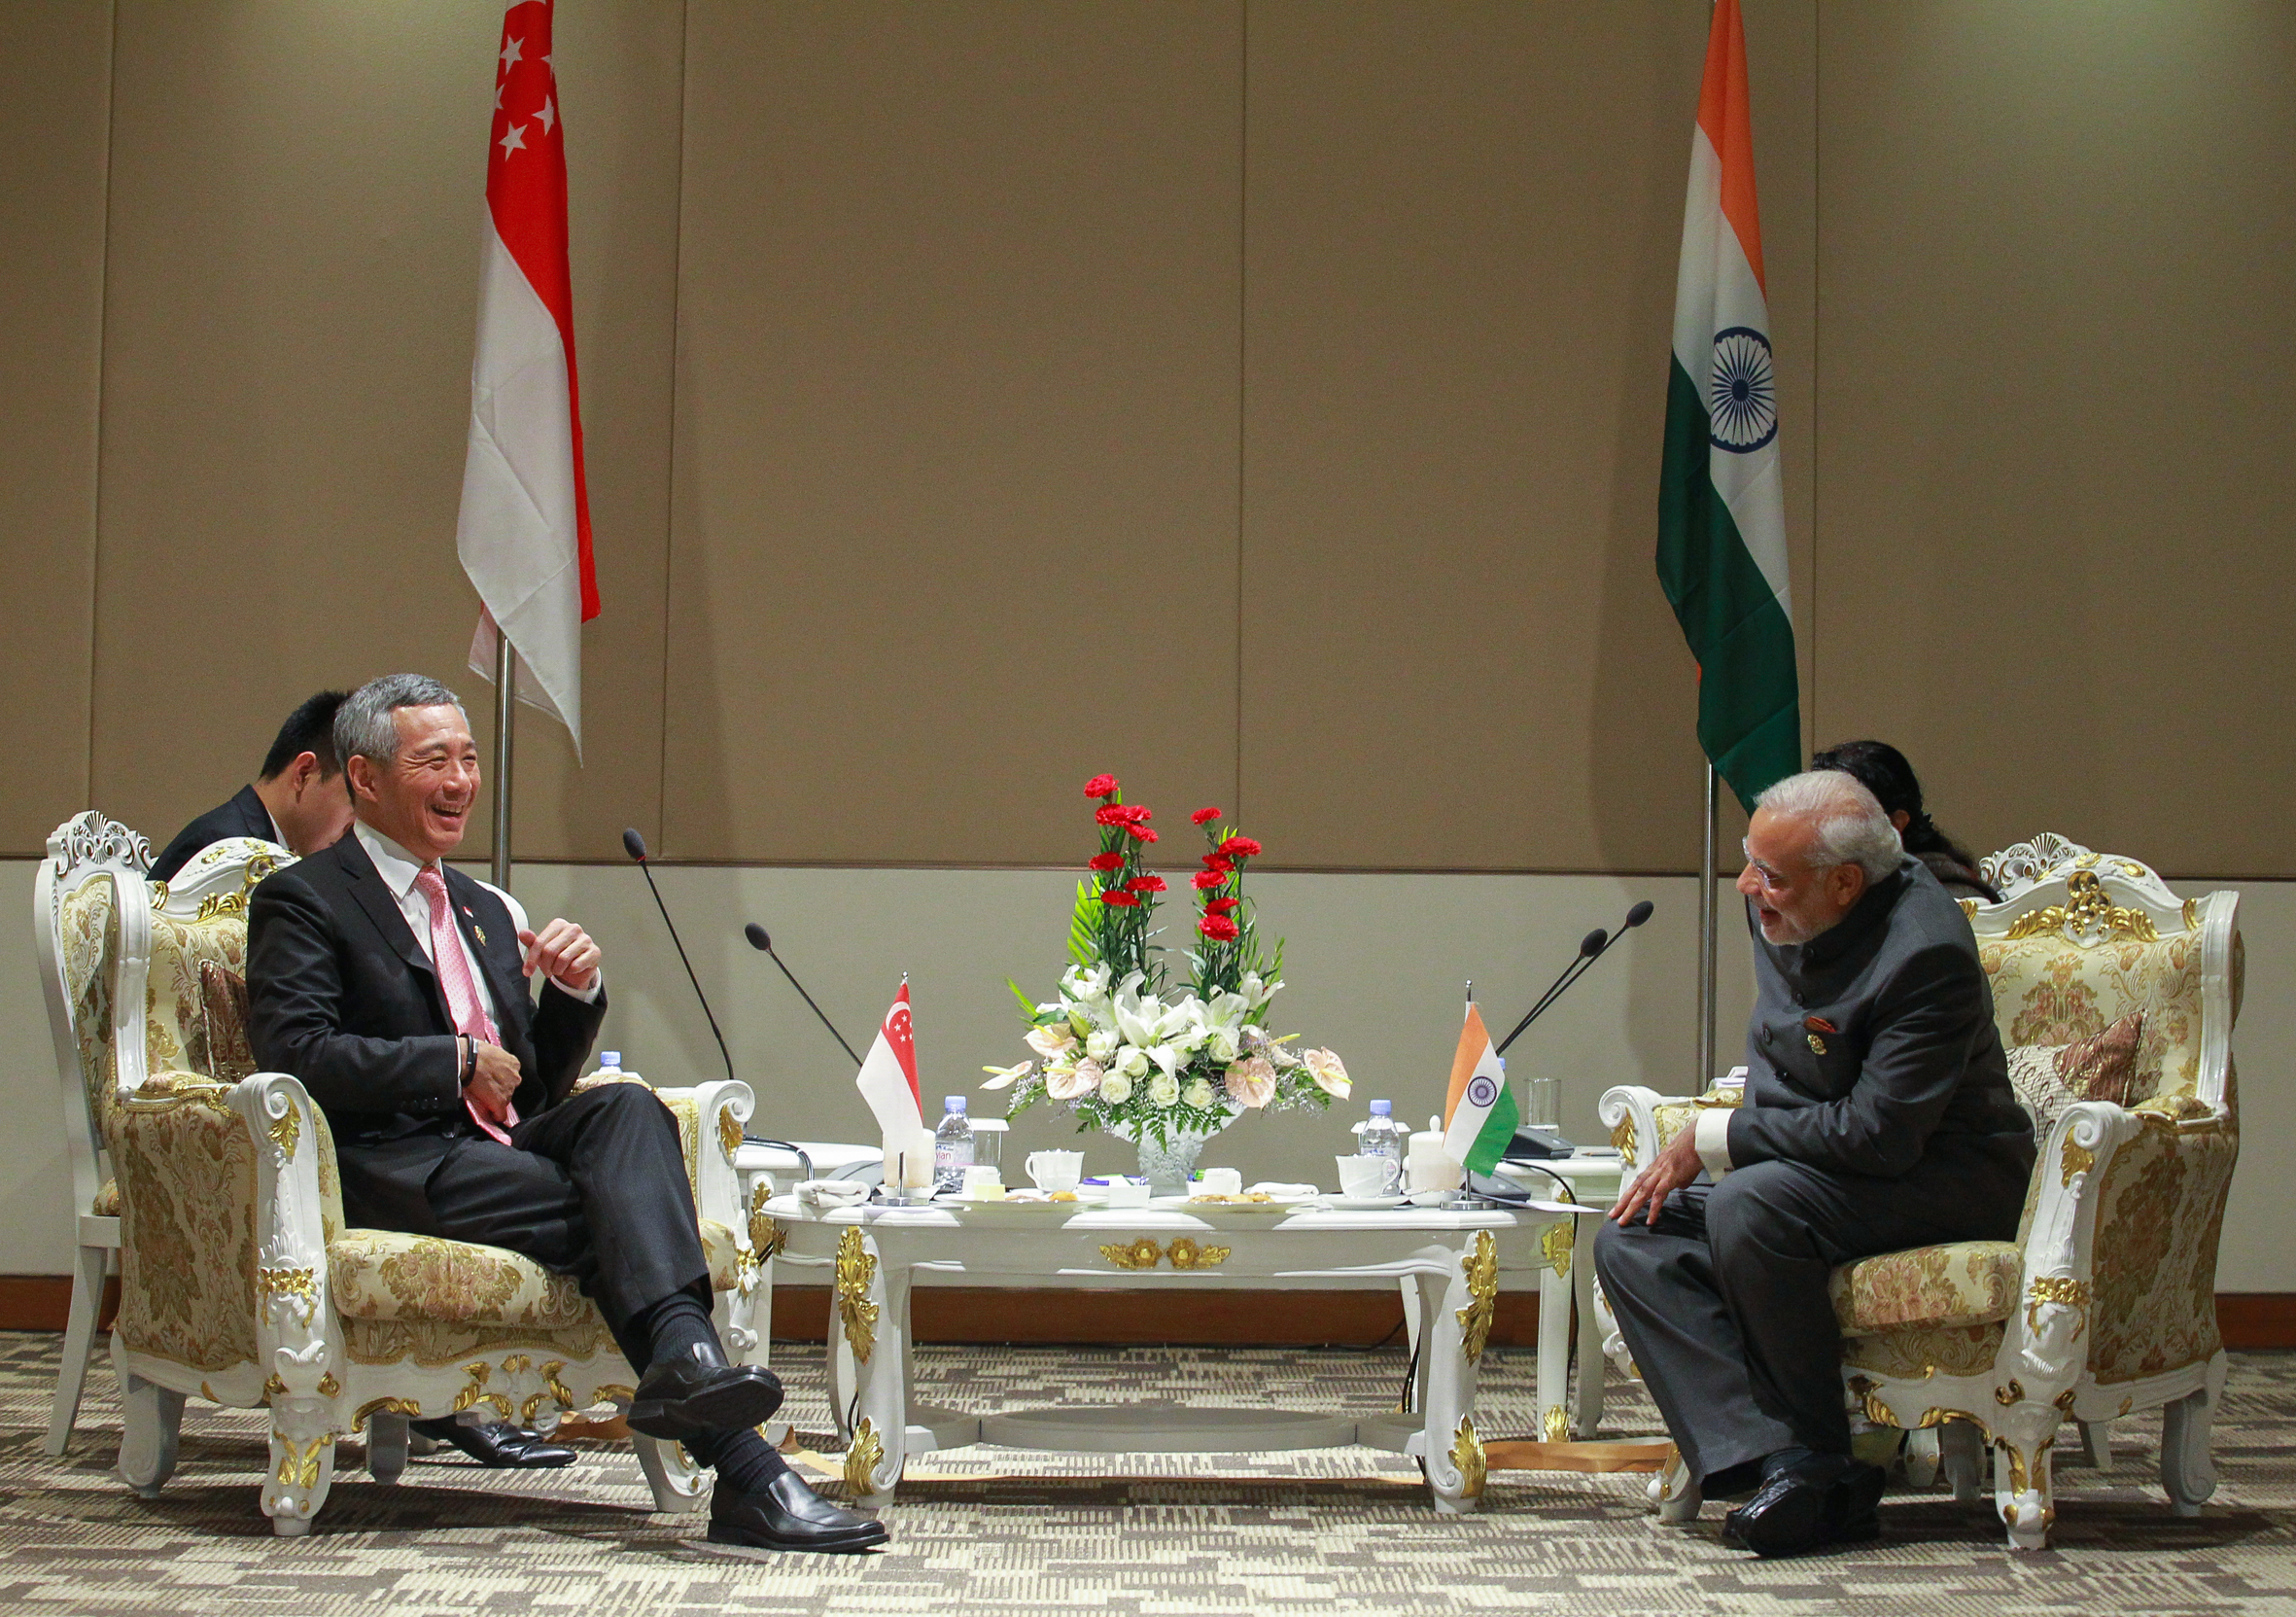 Prime Minister Lee Hsien Loong meeting Indian Prime Minister Narendra Modi at the 25th ASEAN Summit in Nay Pyi Taw, Myanmar from 12 to 13 Nov 2014 (Zaobao Photos © Singapore Press Holdings Limited)